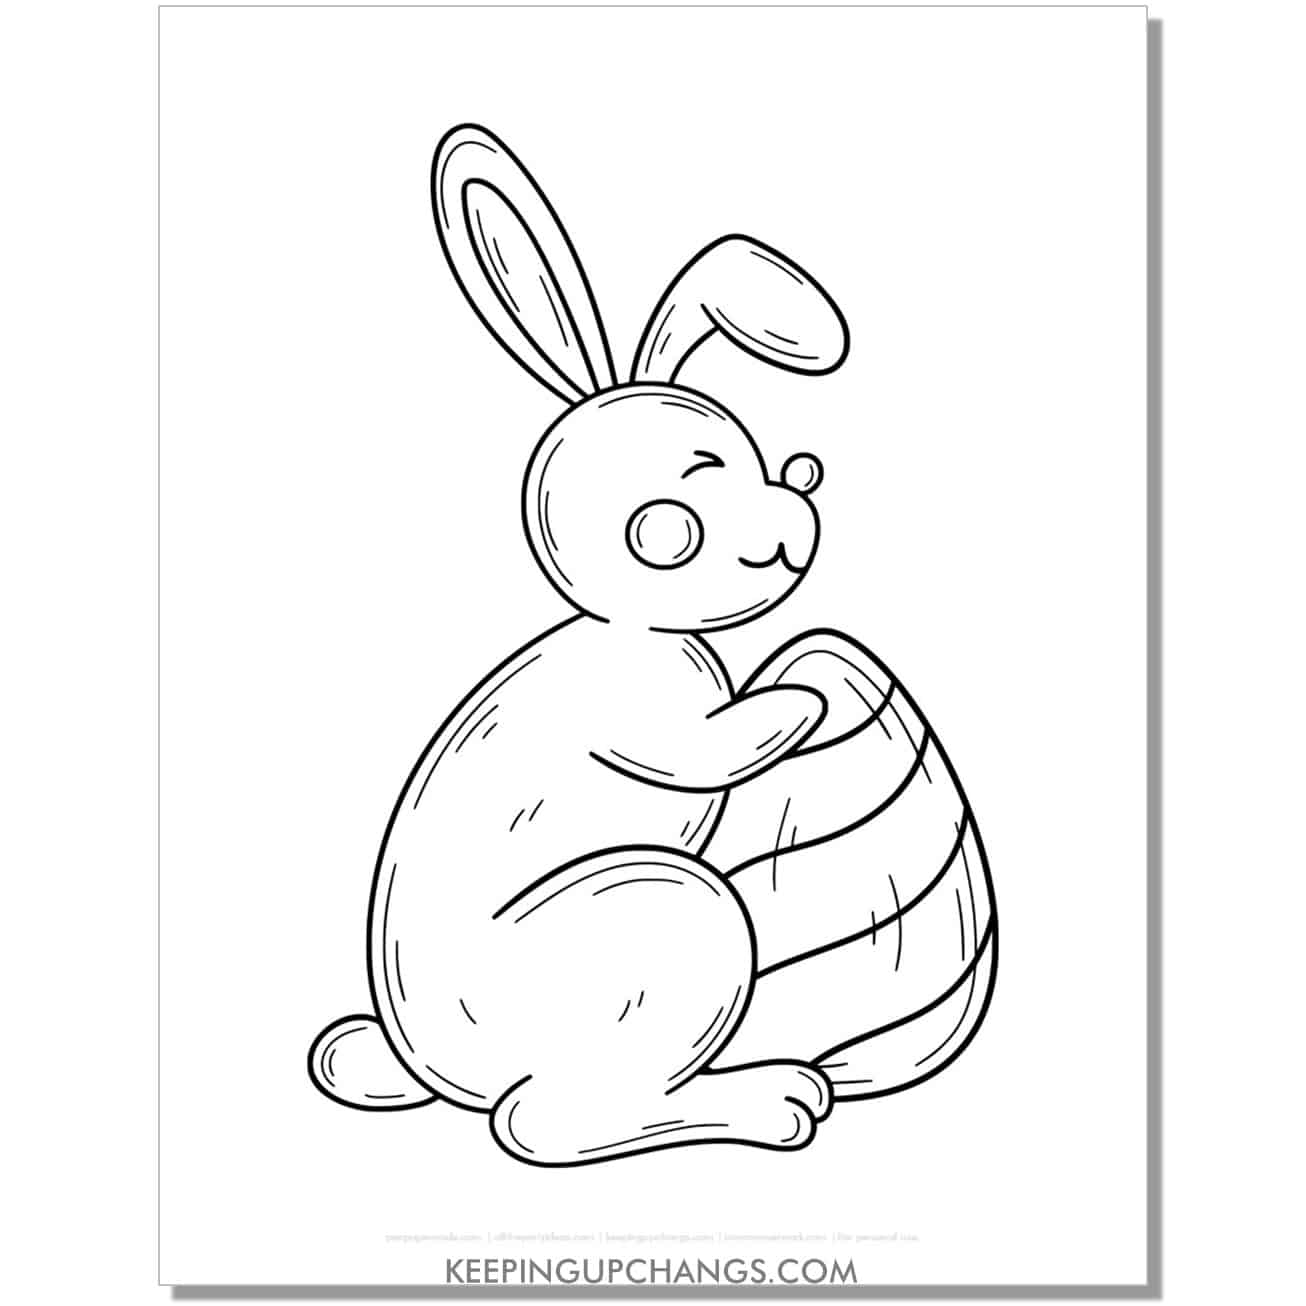 sketch of easter bunny holding striped egg coloring page, sheet.